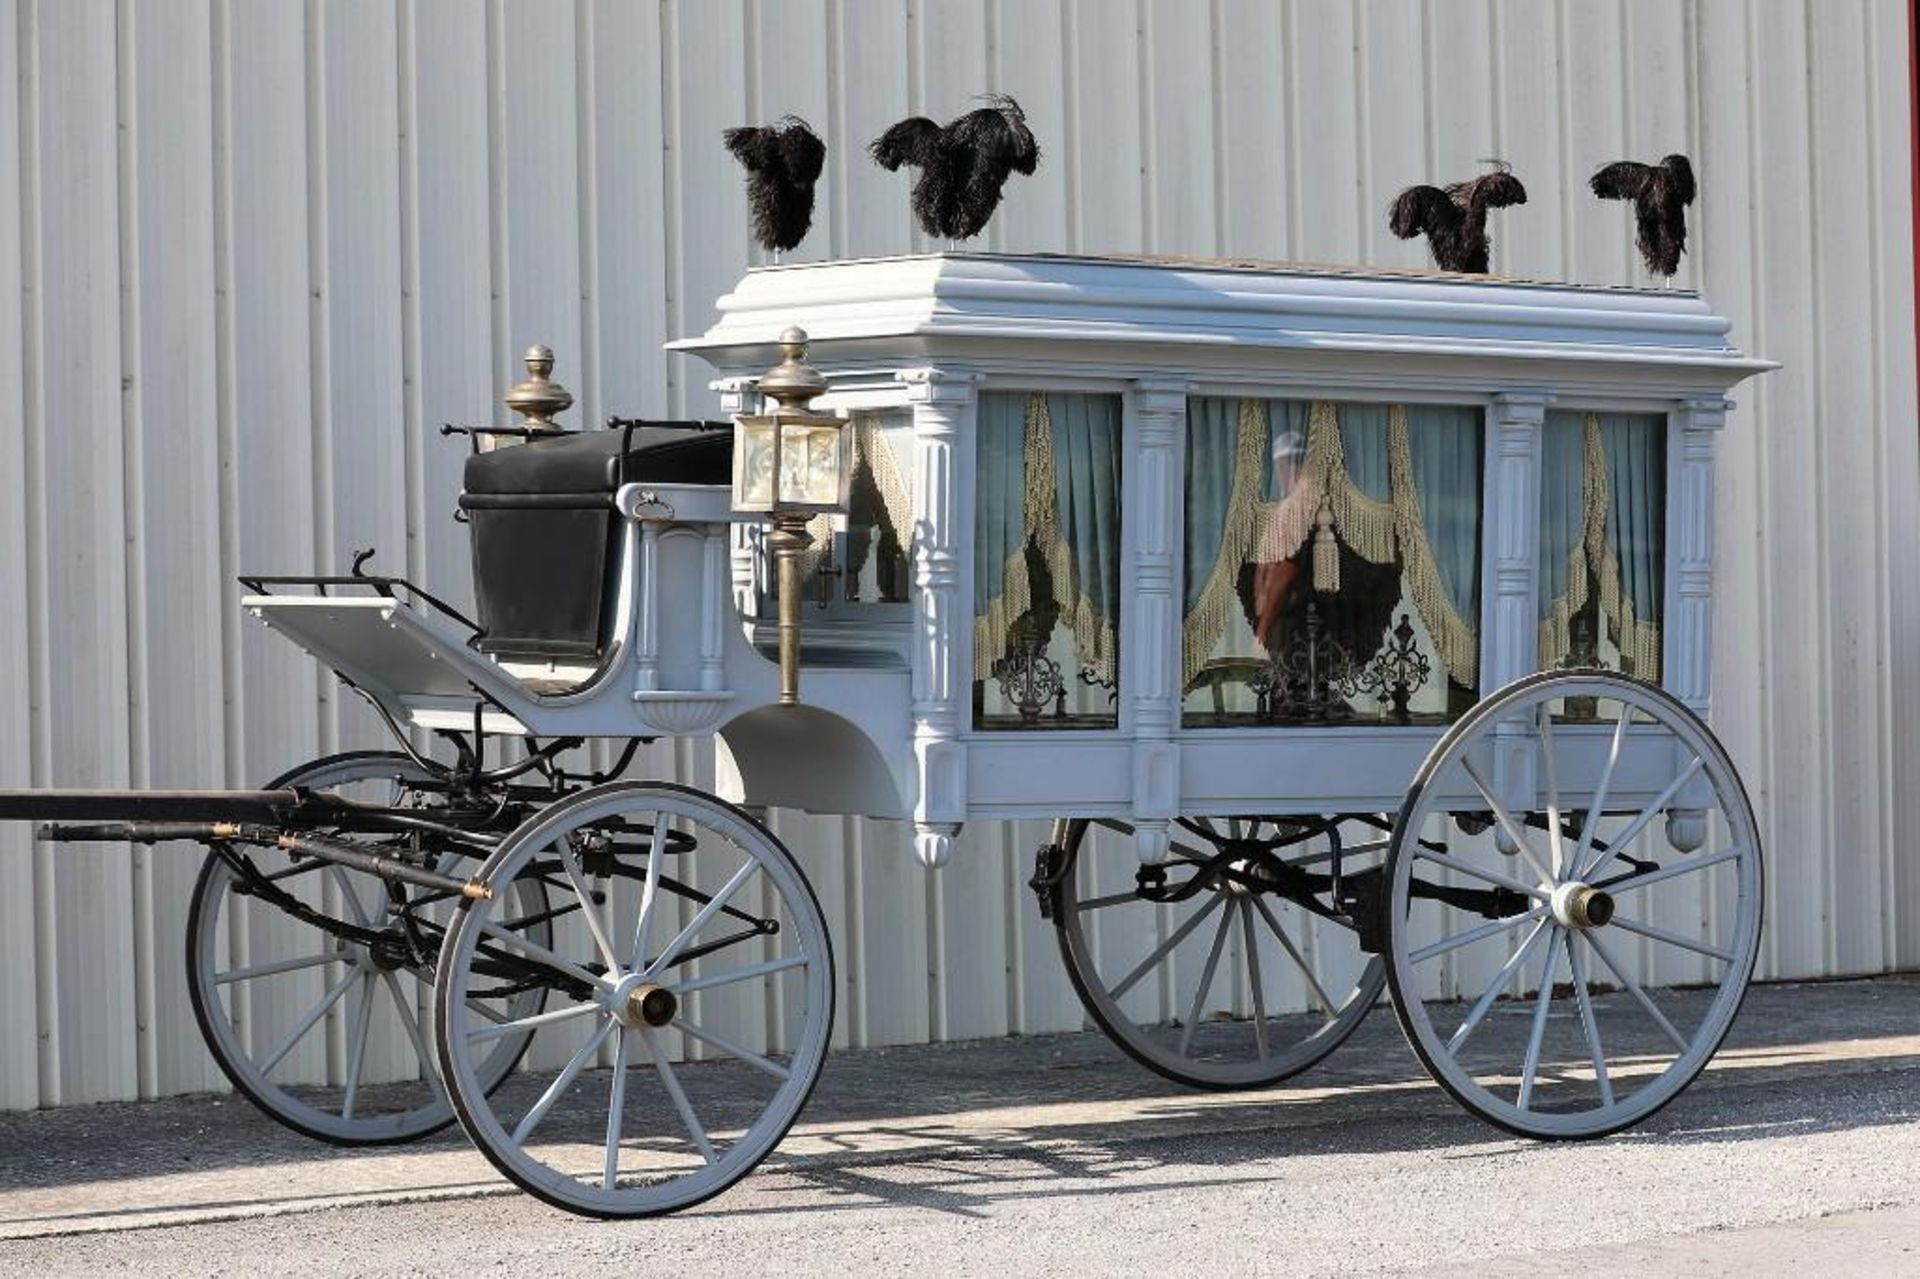 MERTS & RIDDLE HEARSE MFG. Hearse, Setup for 1, 2, or 4 Horse. Located in Ravenna, Ohio. Ornate Lamp - Image 2 of 5